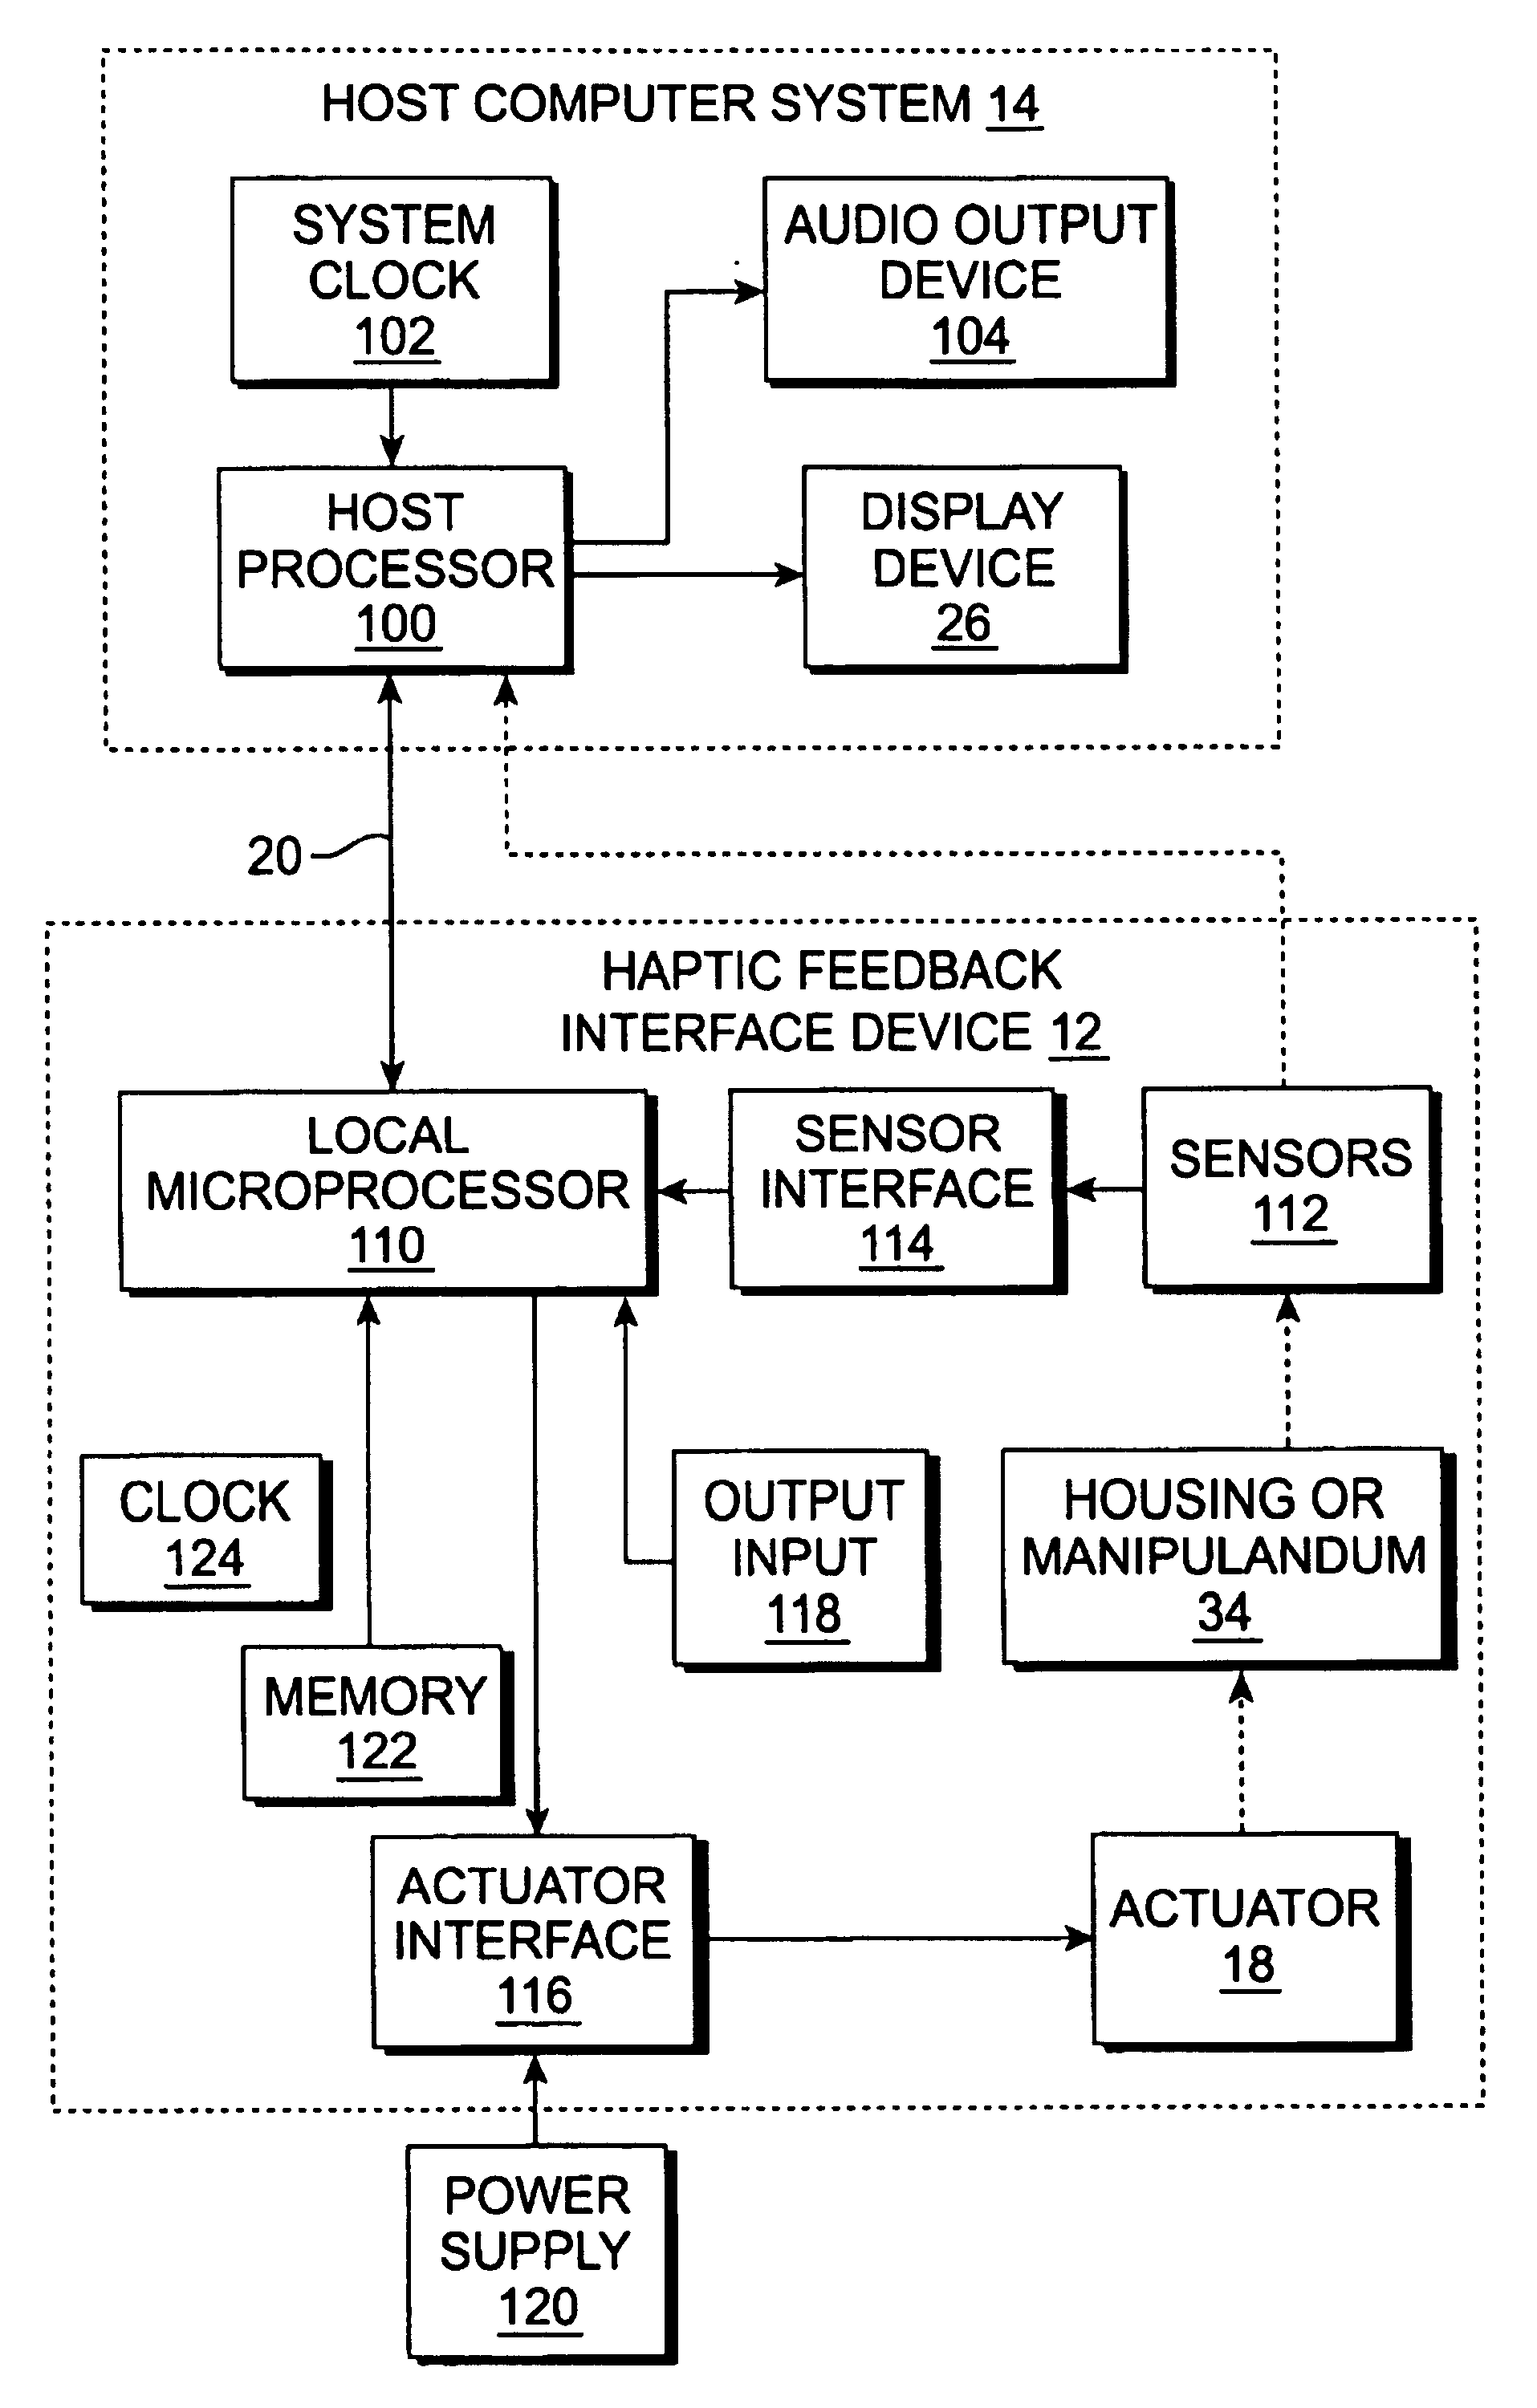 Actuator thermal protection in haptic feedback devices